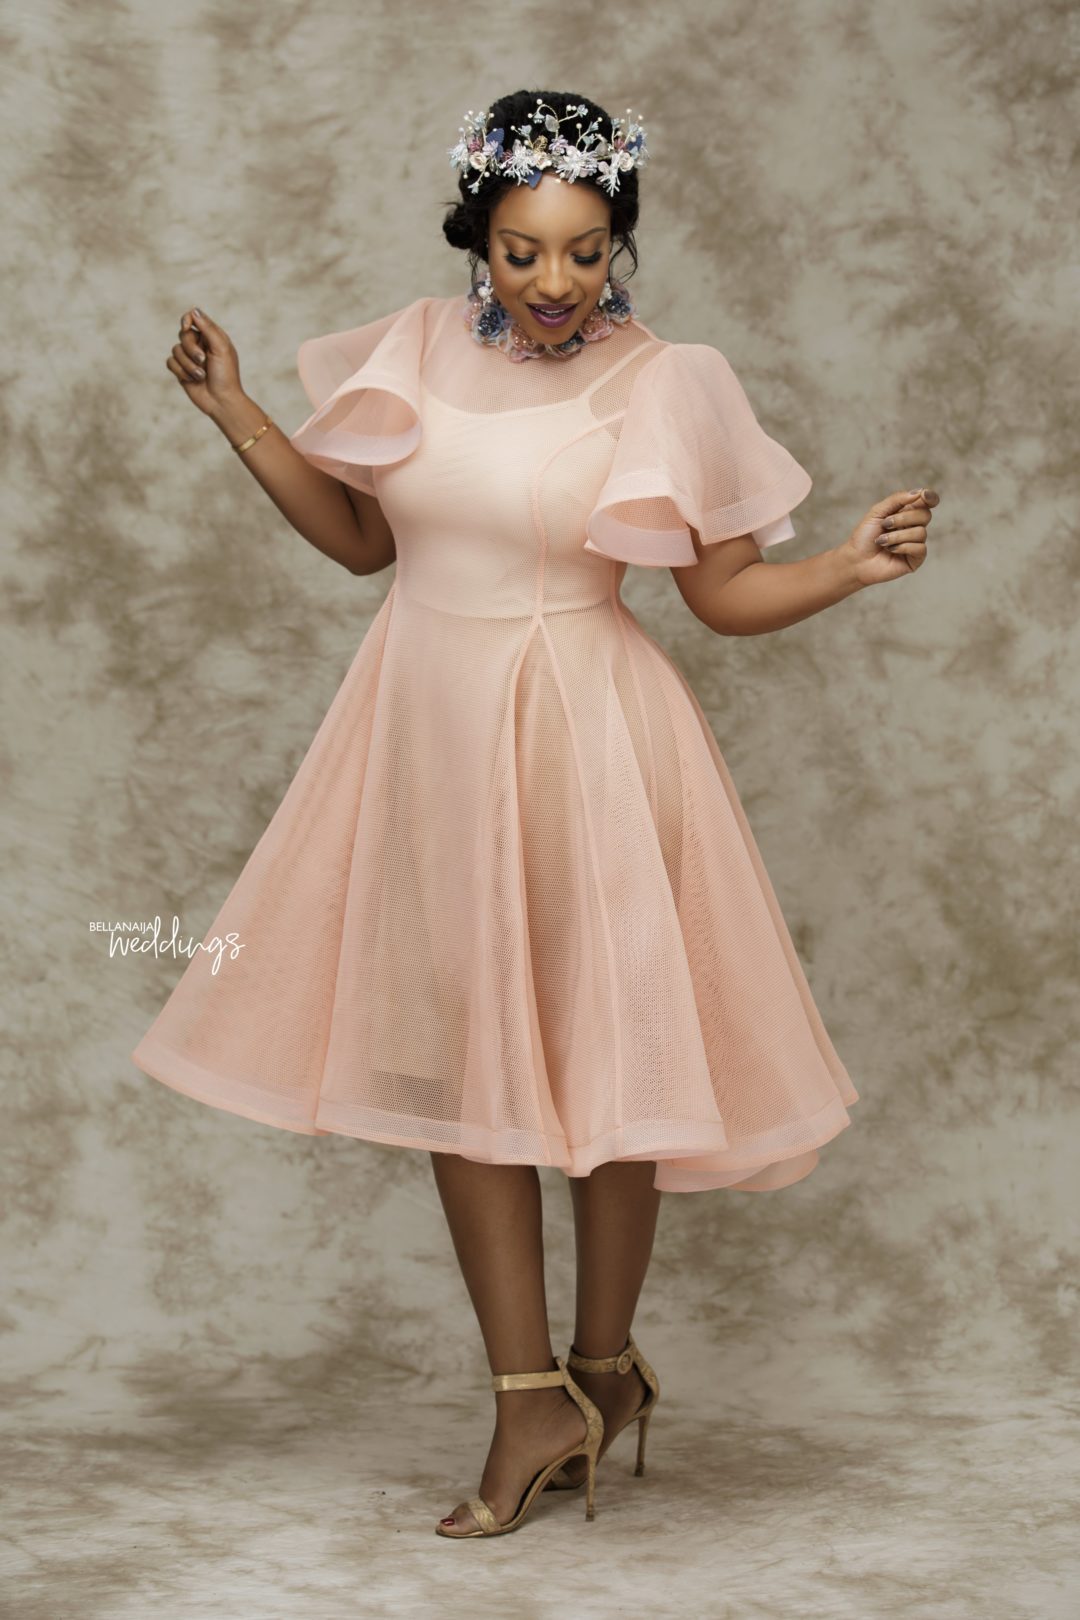 Keep It Chic Like Joselyn Dumas with These Wedding Guest Look Ideas ...